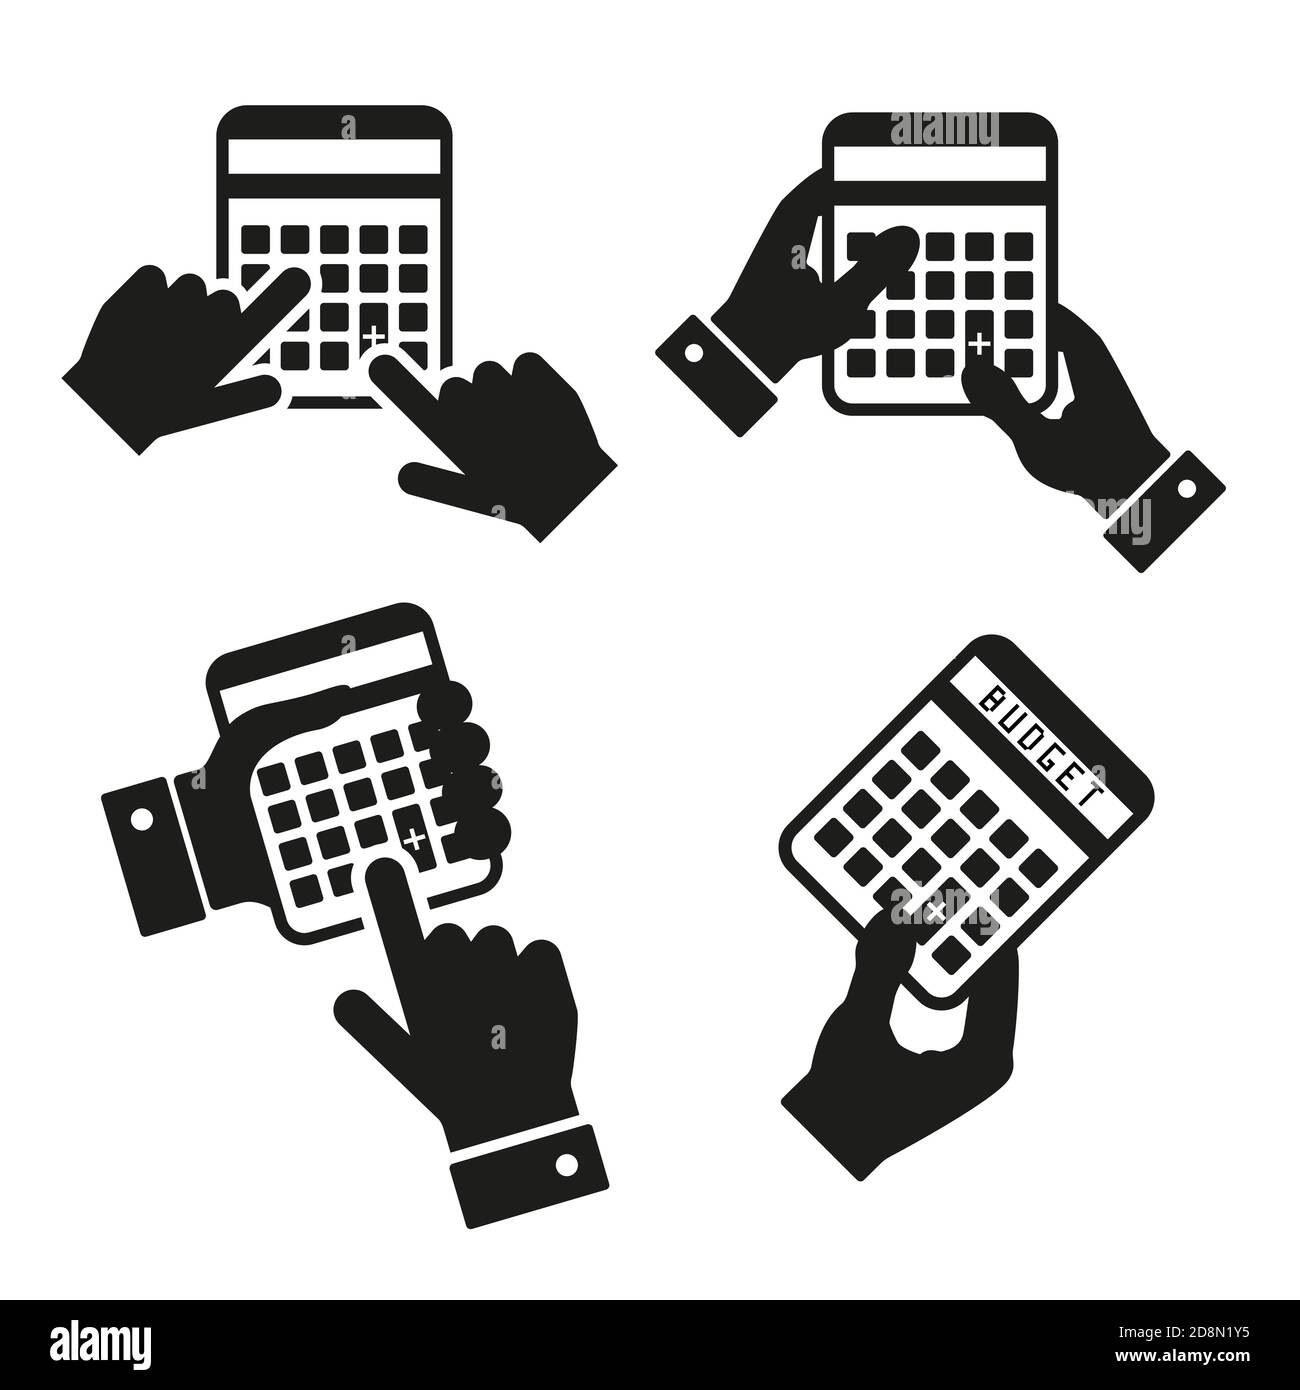 Hands with calculators icons. Calculating hands. Accounting, budget set. Stock Photo